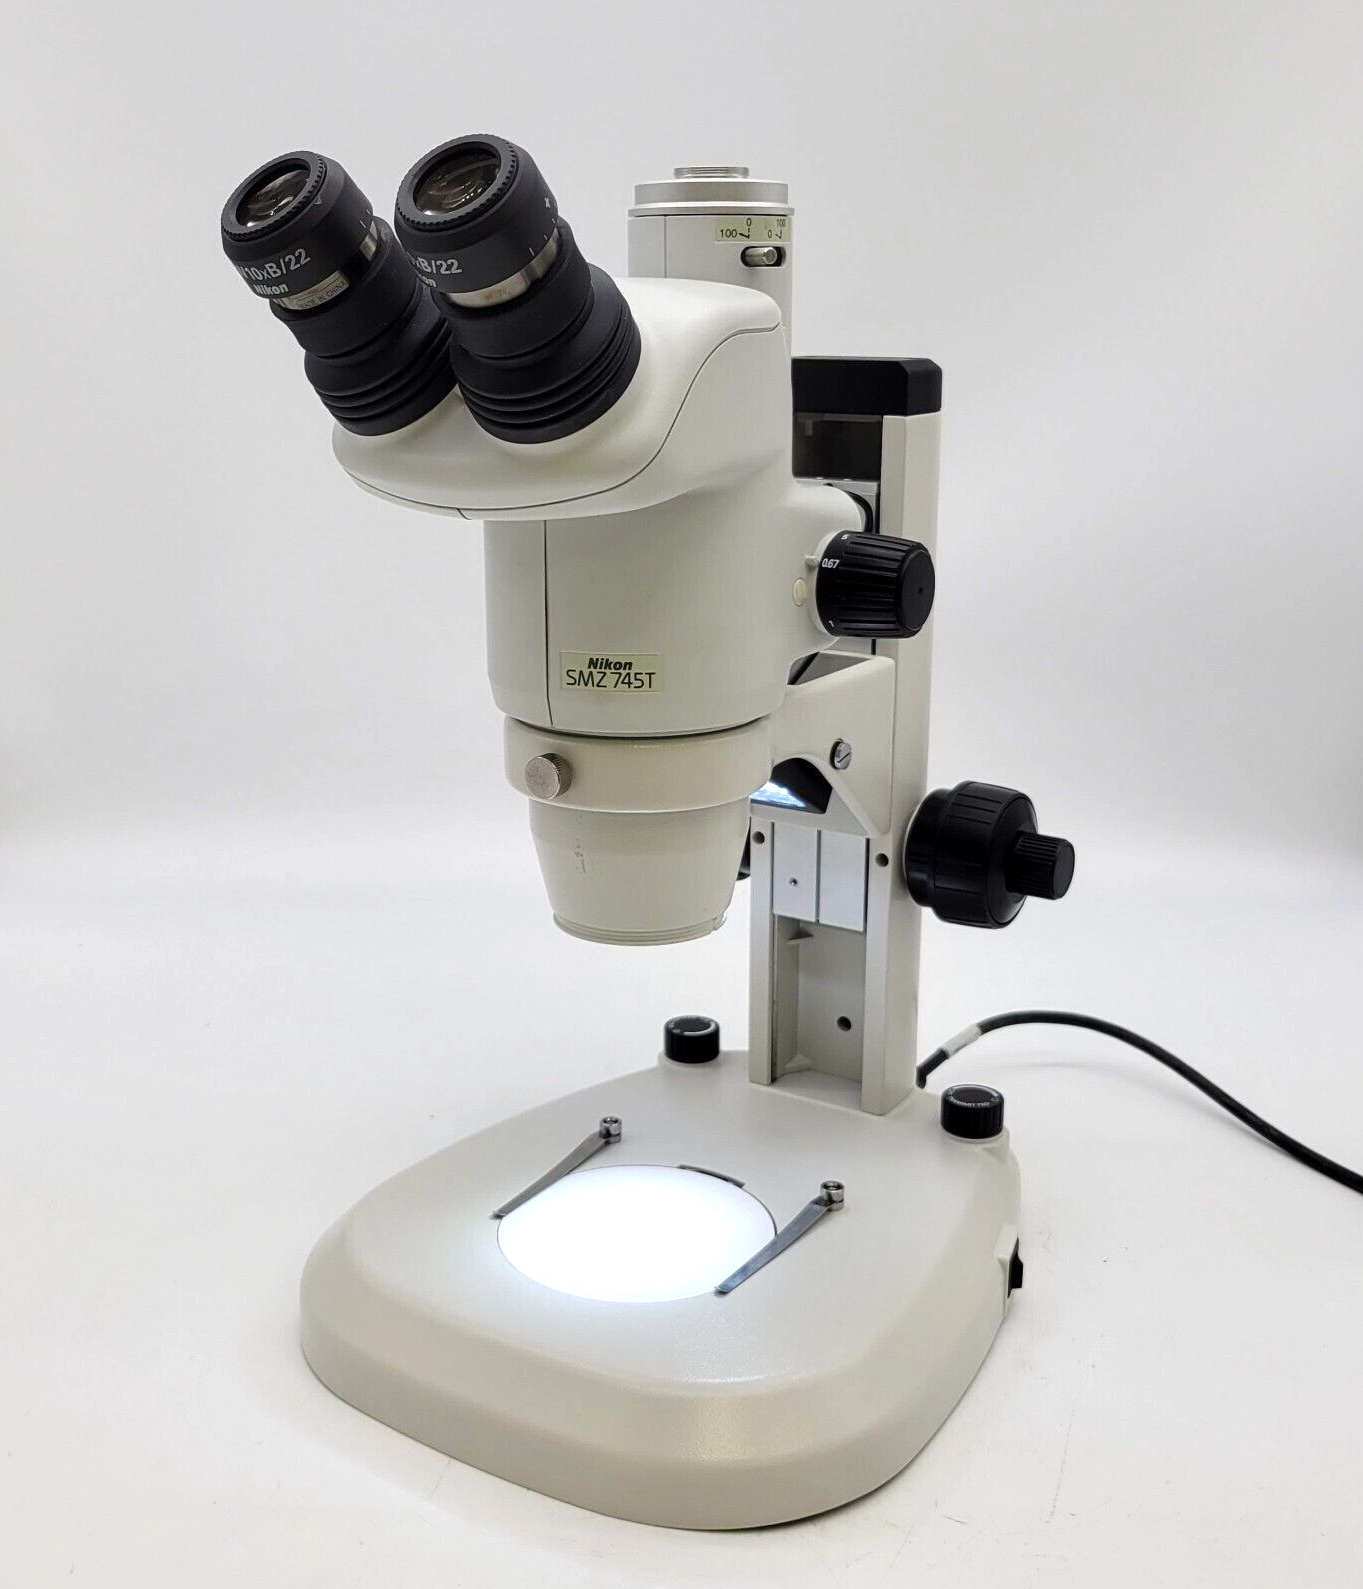 Nikon Stereo Microscope SMZ745T with Transmitted &amp; Reflected Light Stand